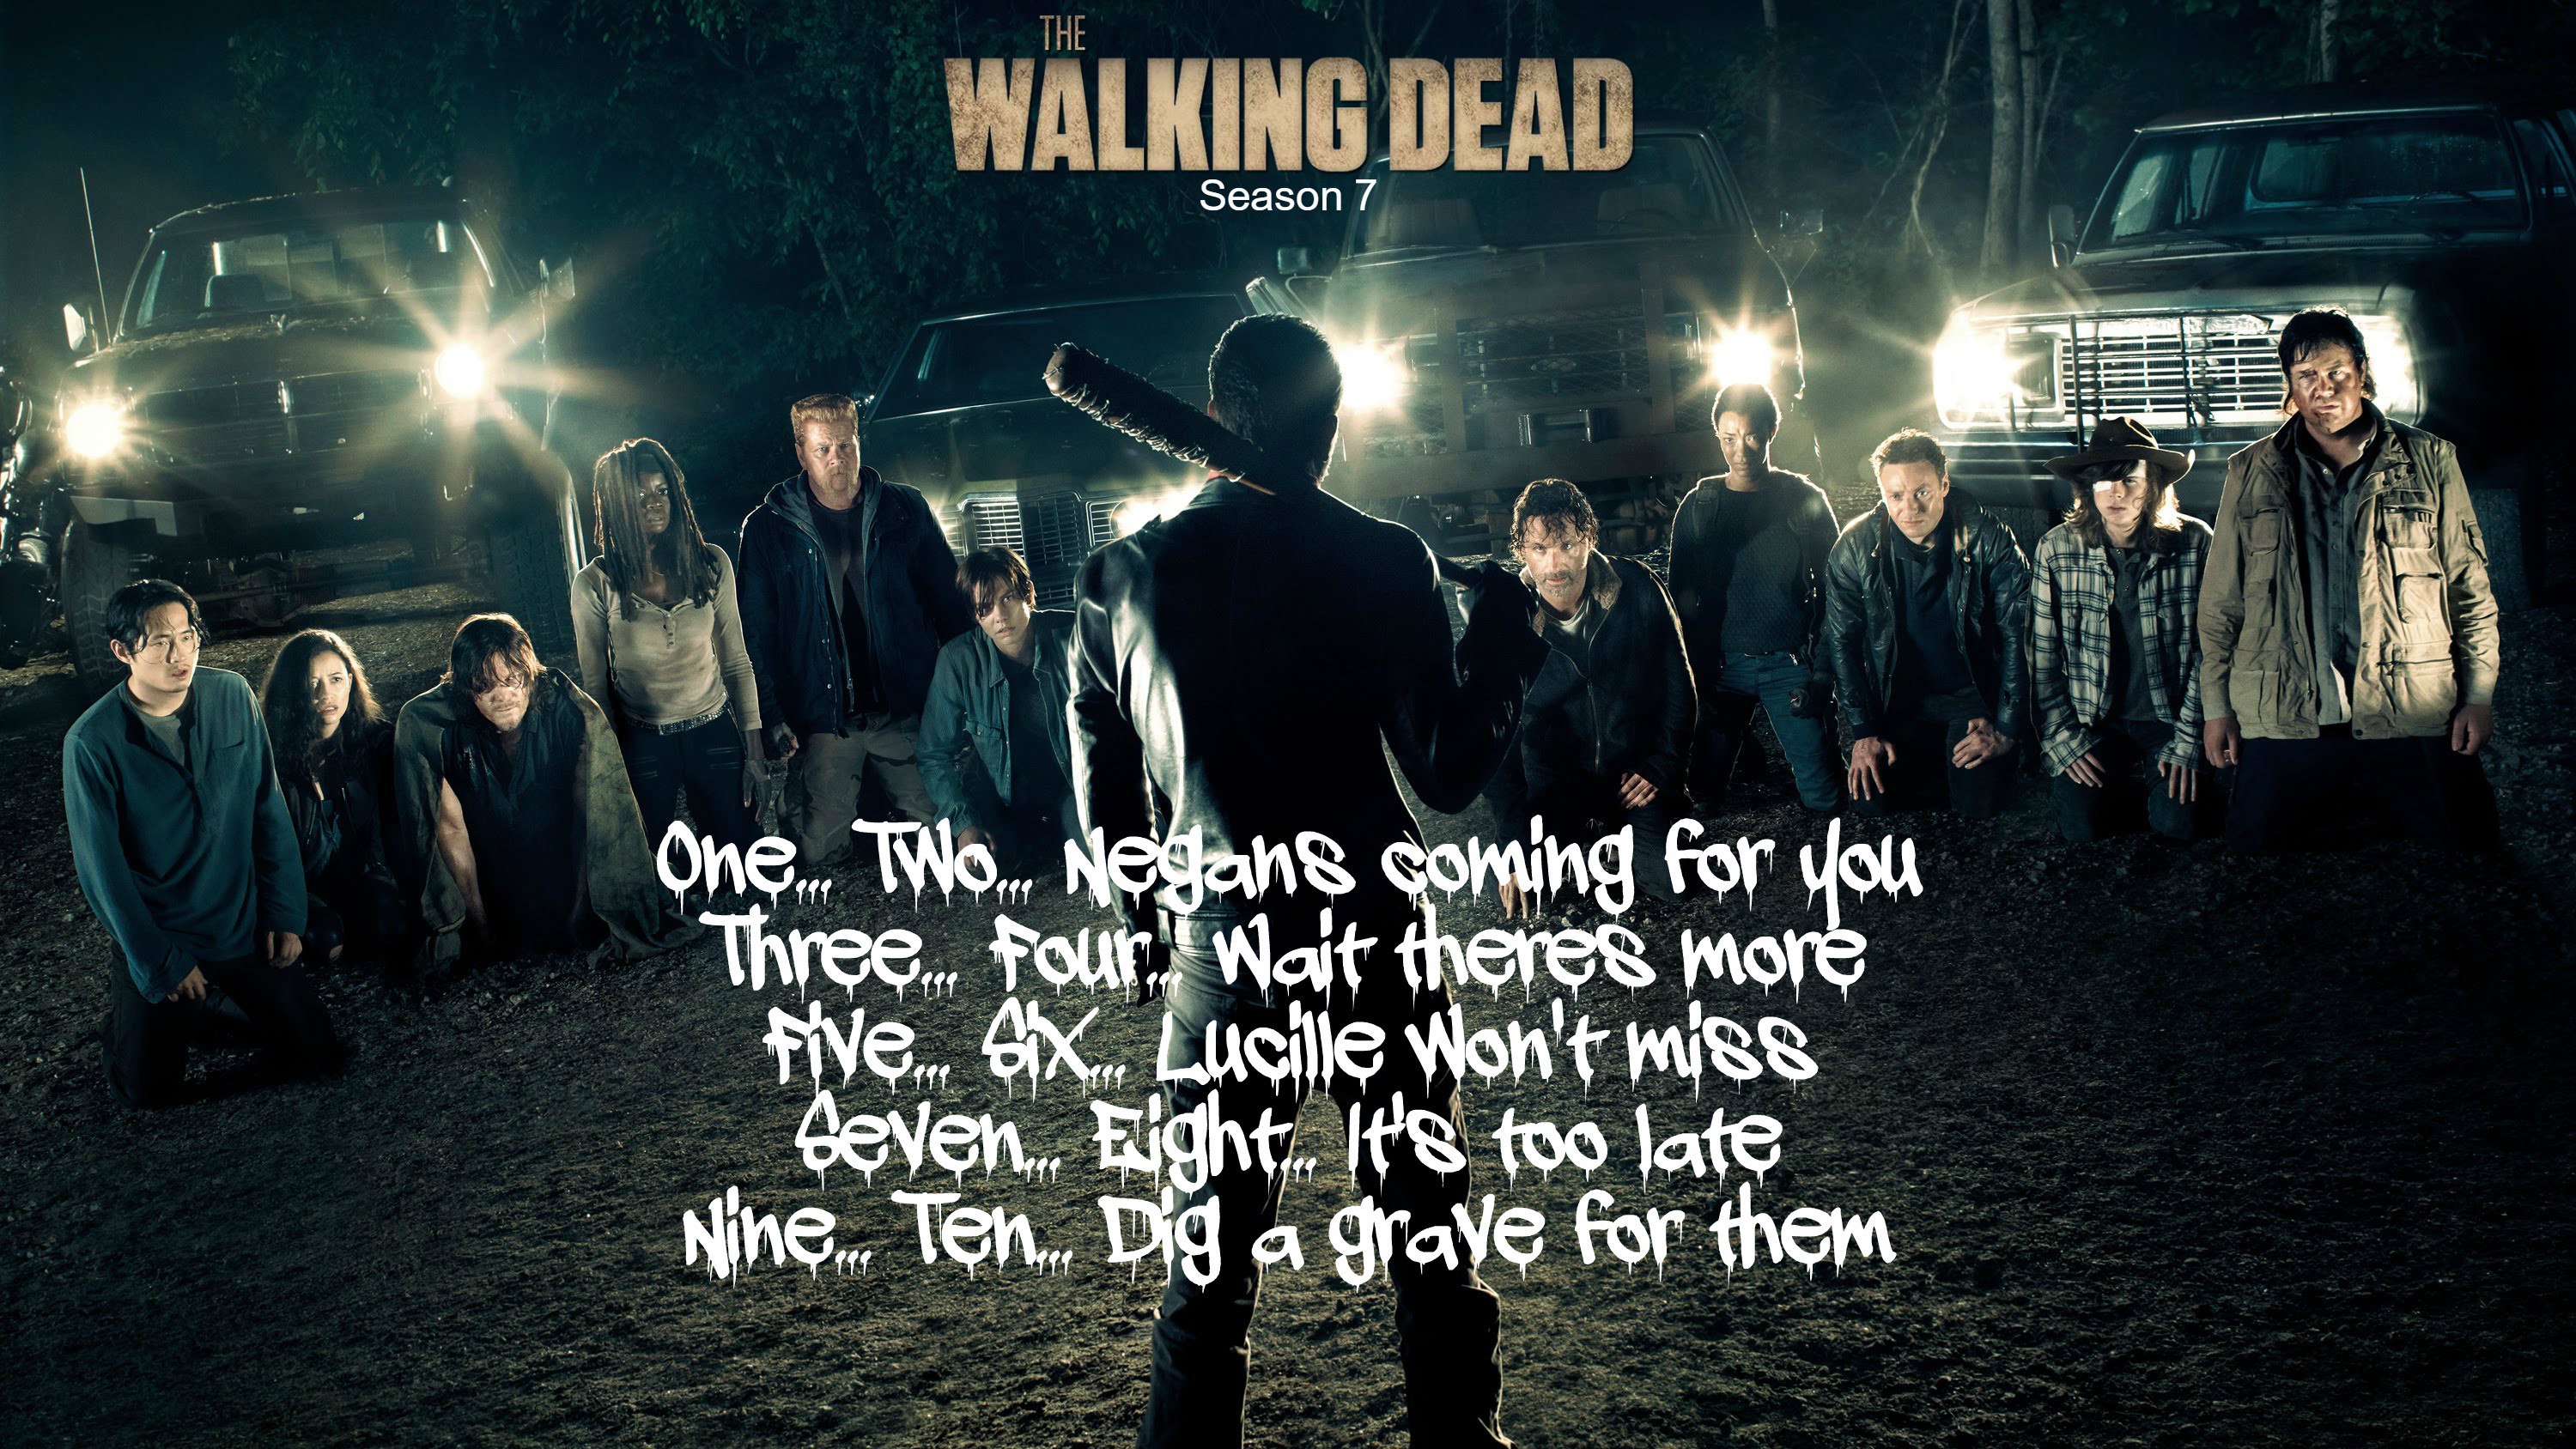 The Walking Dead Wallpaper 1366x768 55 Images